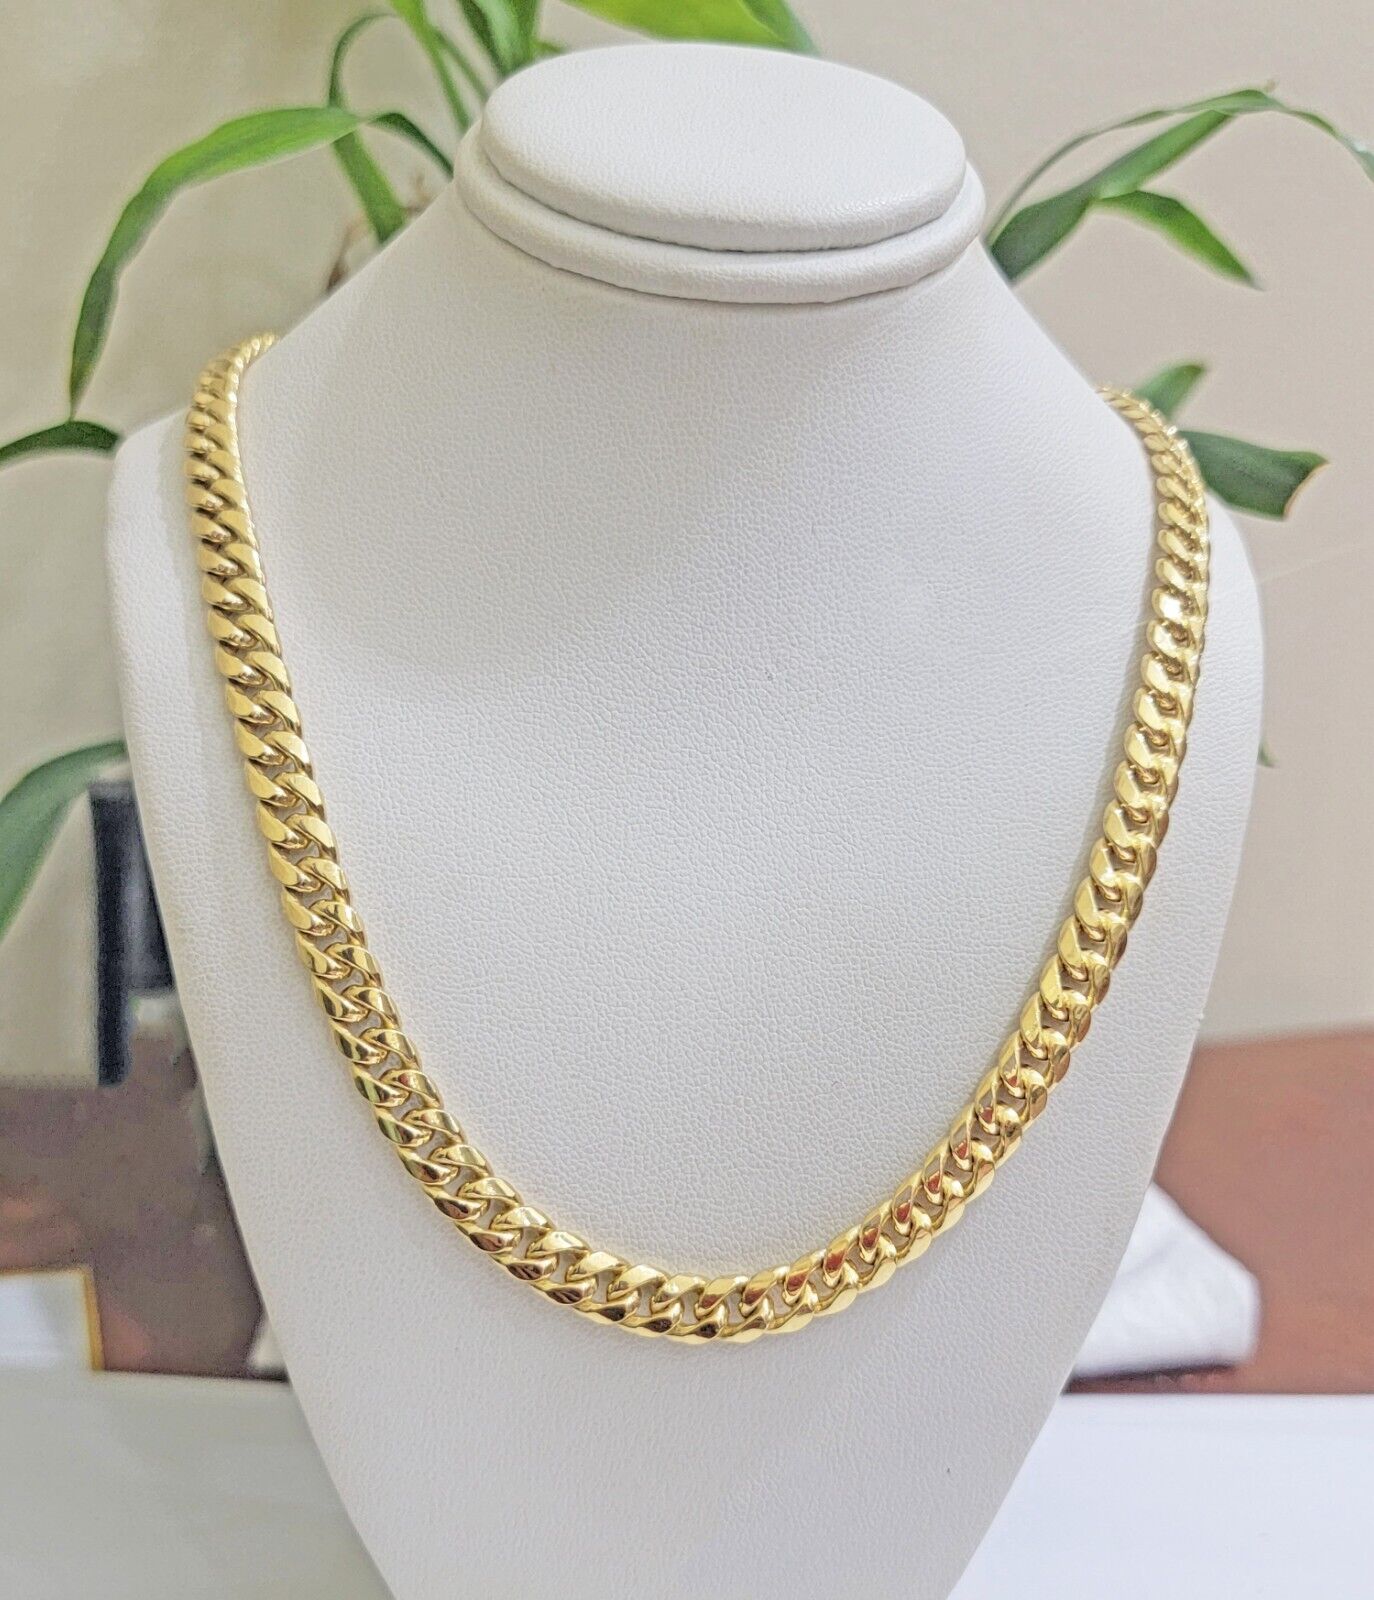 10k Gold Necklace 7mm 24 Inch Miami Cuban Link Chain REAL 10kt yellow Gold Men's